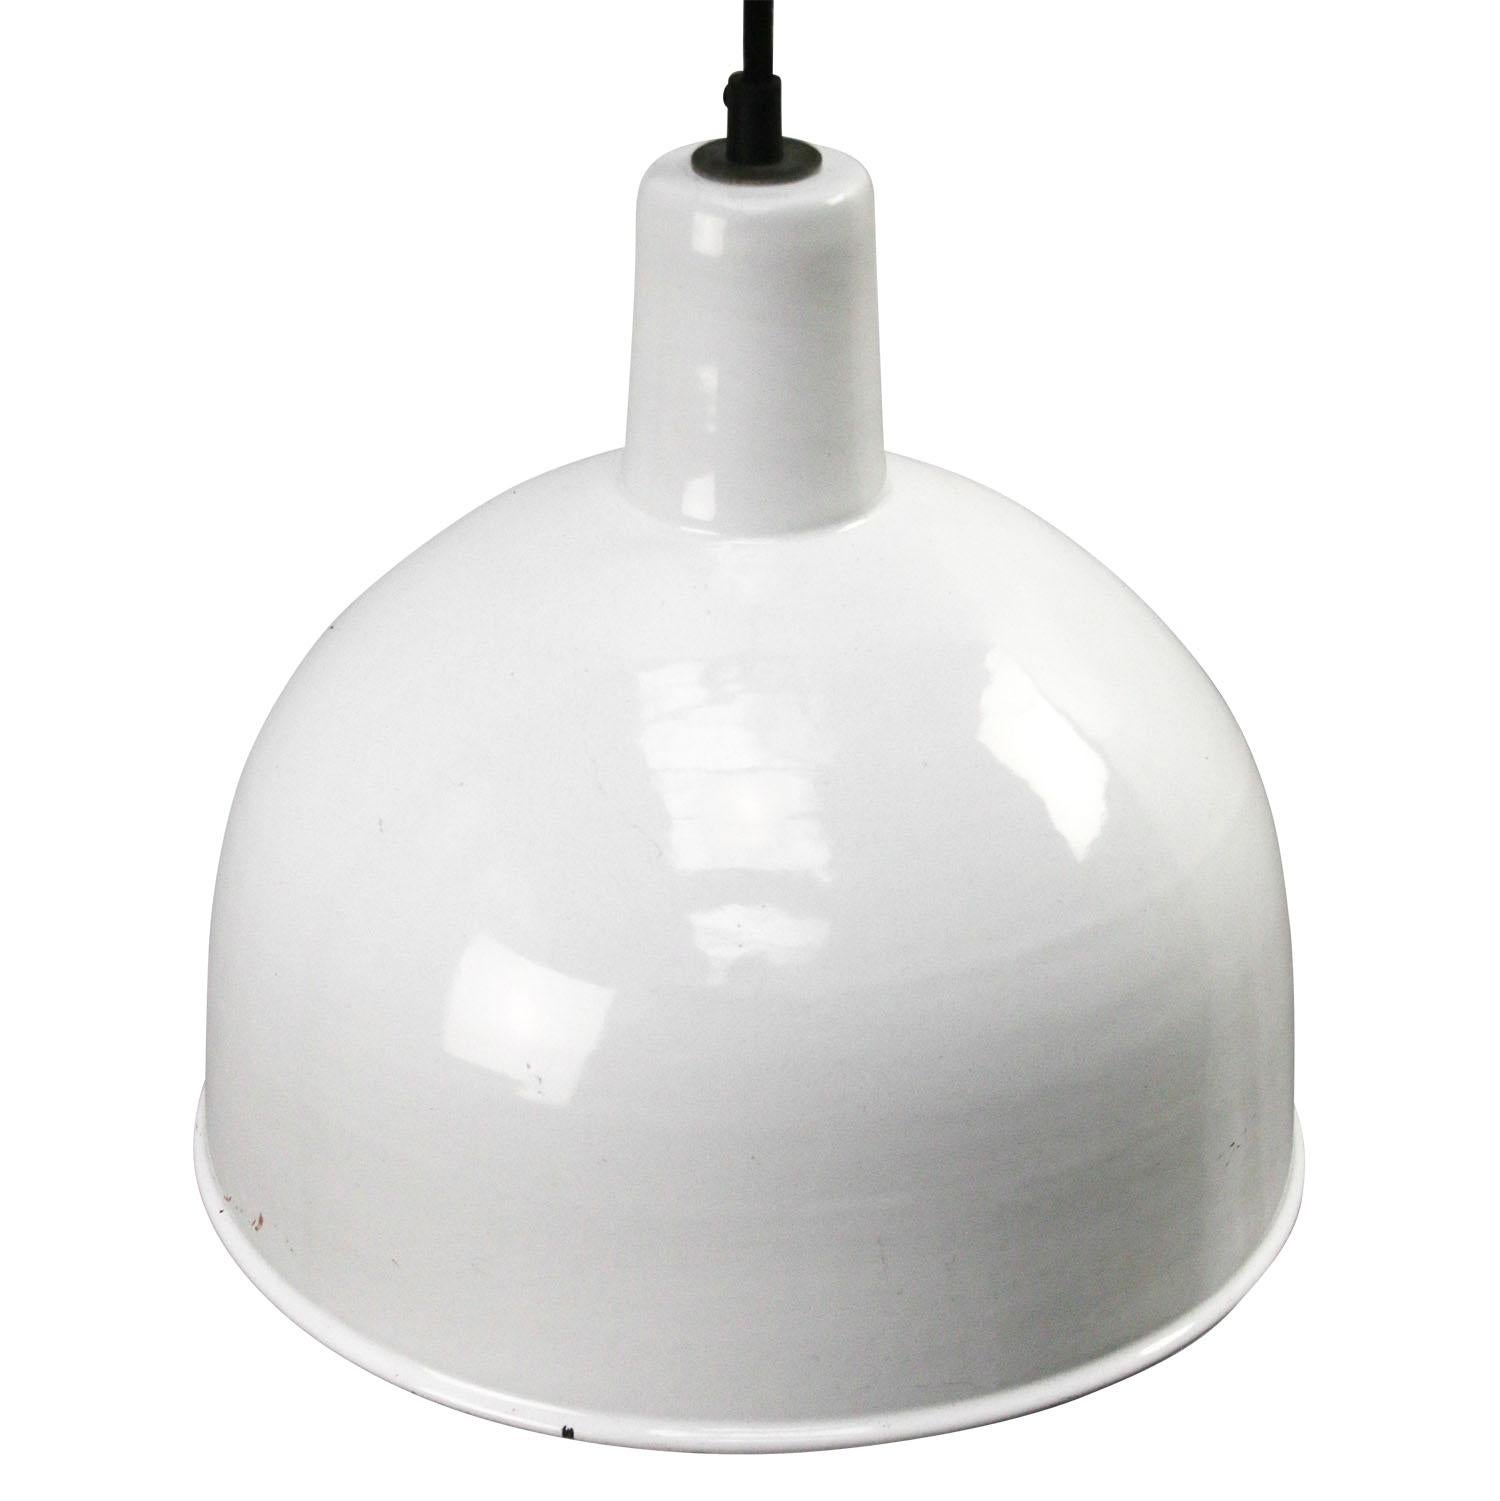 Factory hanging light. White enamel. White interior.

Weight: 1.4 kg / 3.1 lb

Priced per individual item. All lamps have been made suitable by international standards for incandescent light bulbs, energy-efficient and LED bulbs. E26/E27 bulb